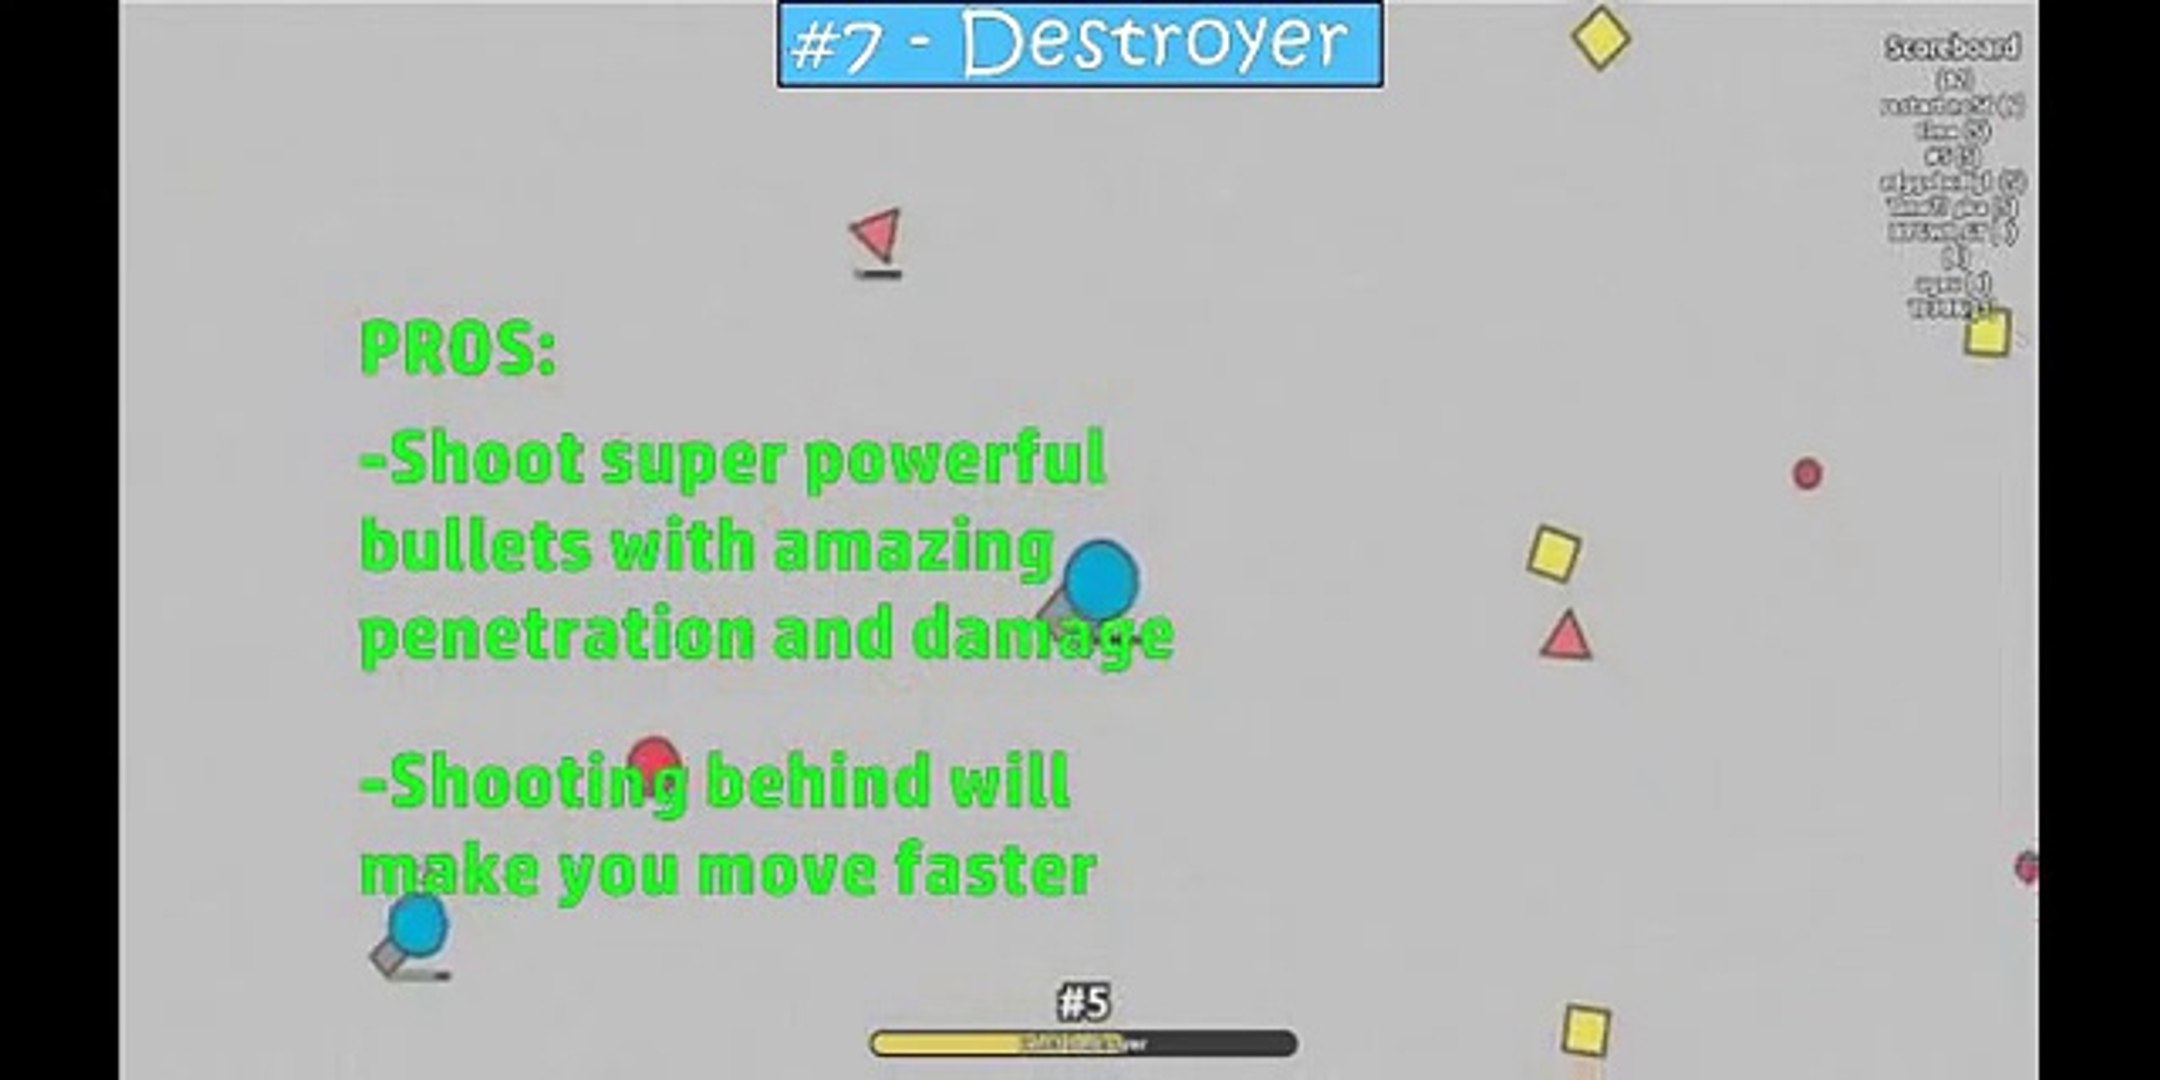 Diep.io - Ranking the classes/upgrades from Worst to Best [OUTDATED] 